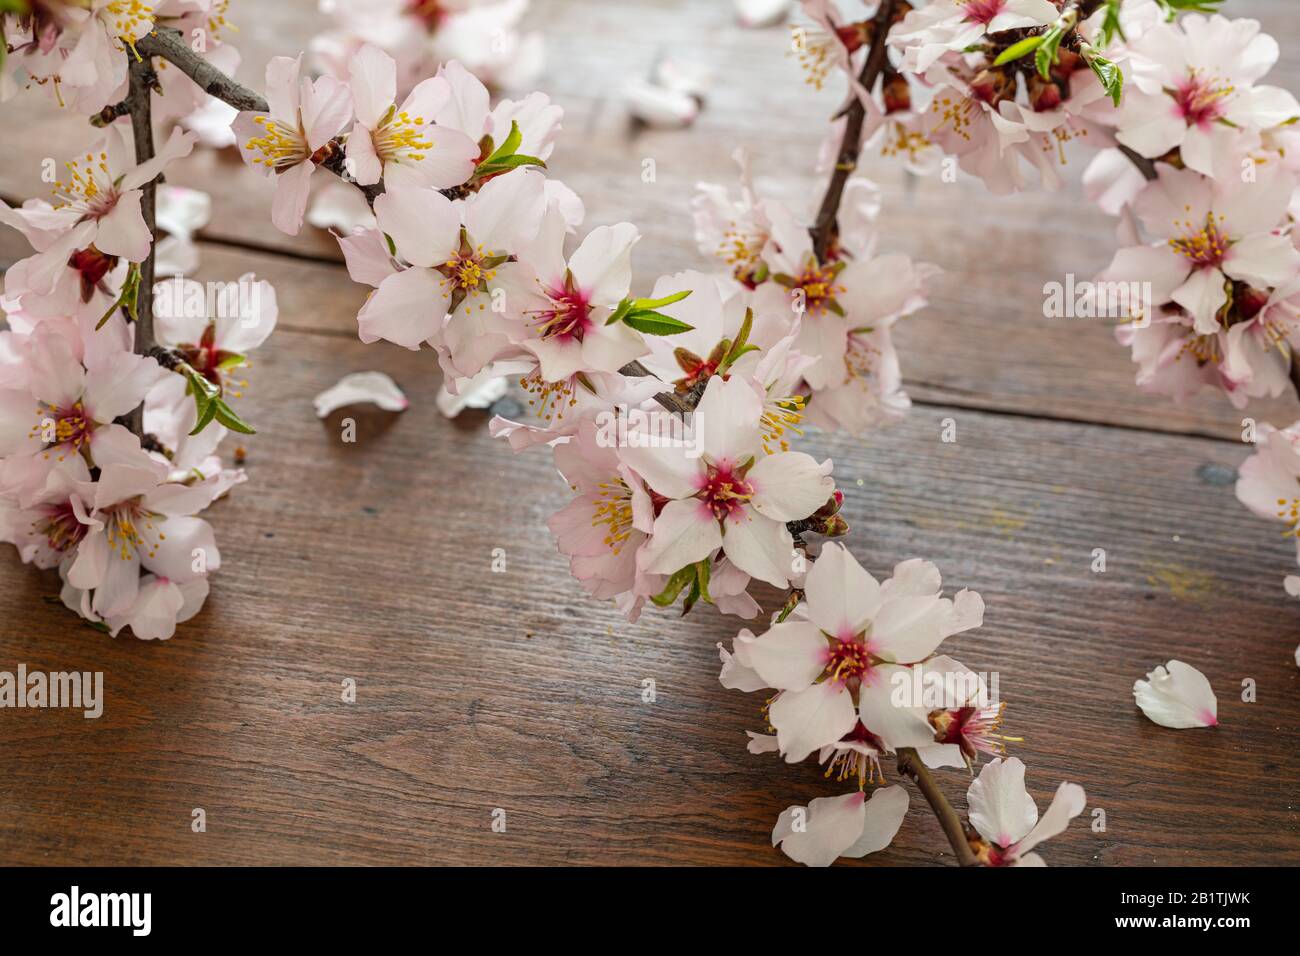 Almond blossoms on wood table background, Springtime seasonal natural decoration. Close up view. Stock Photo